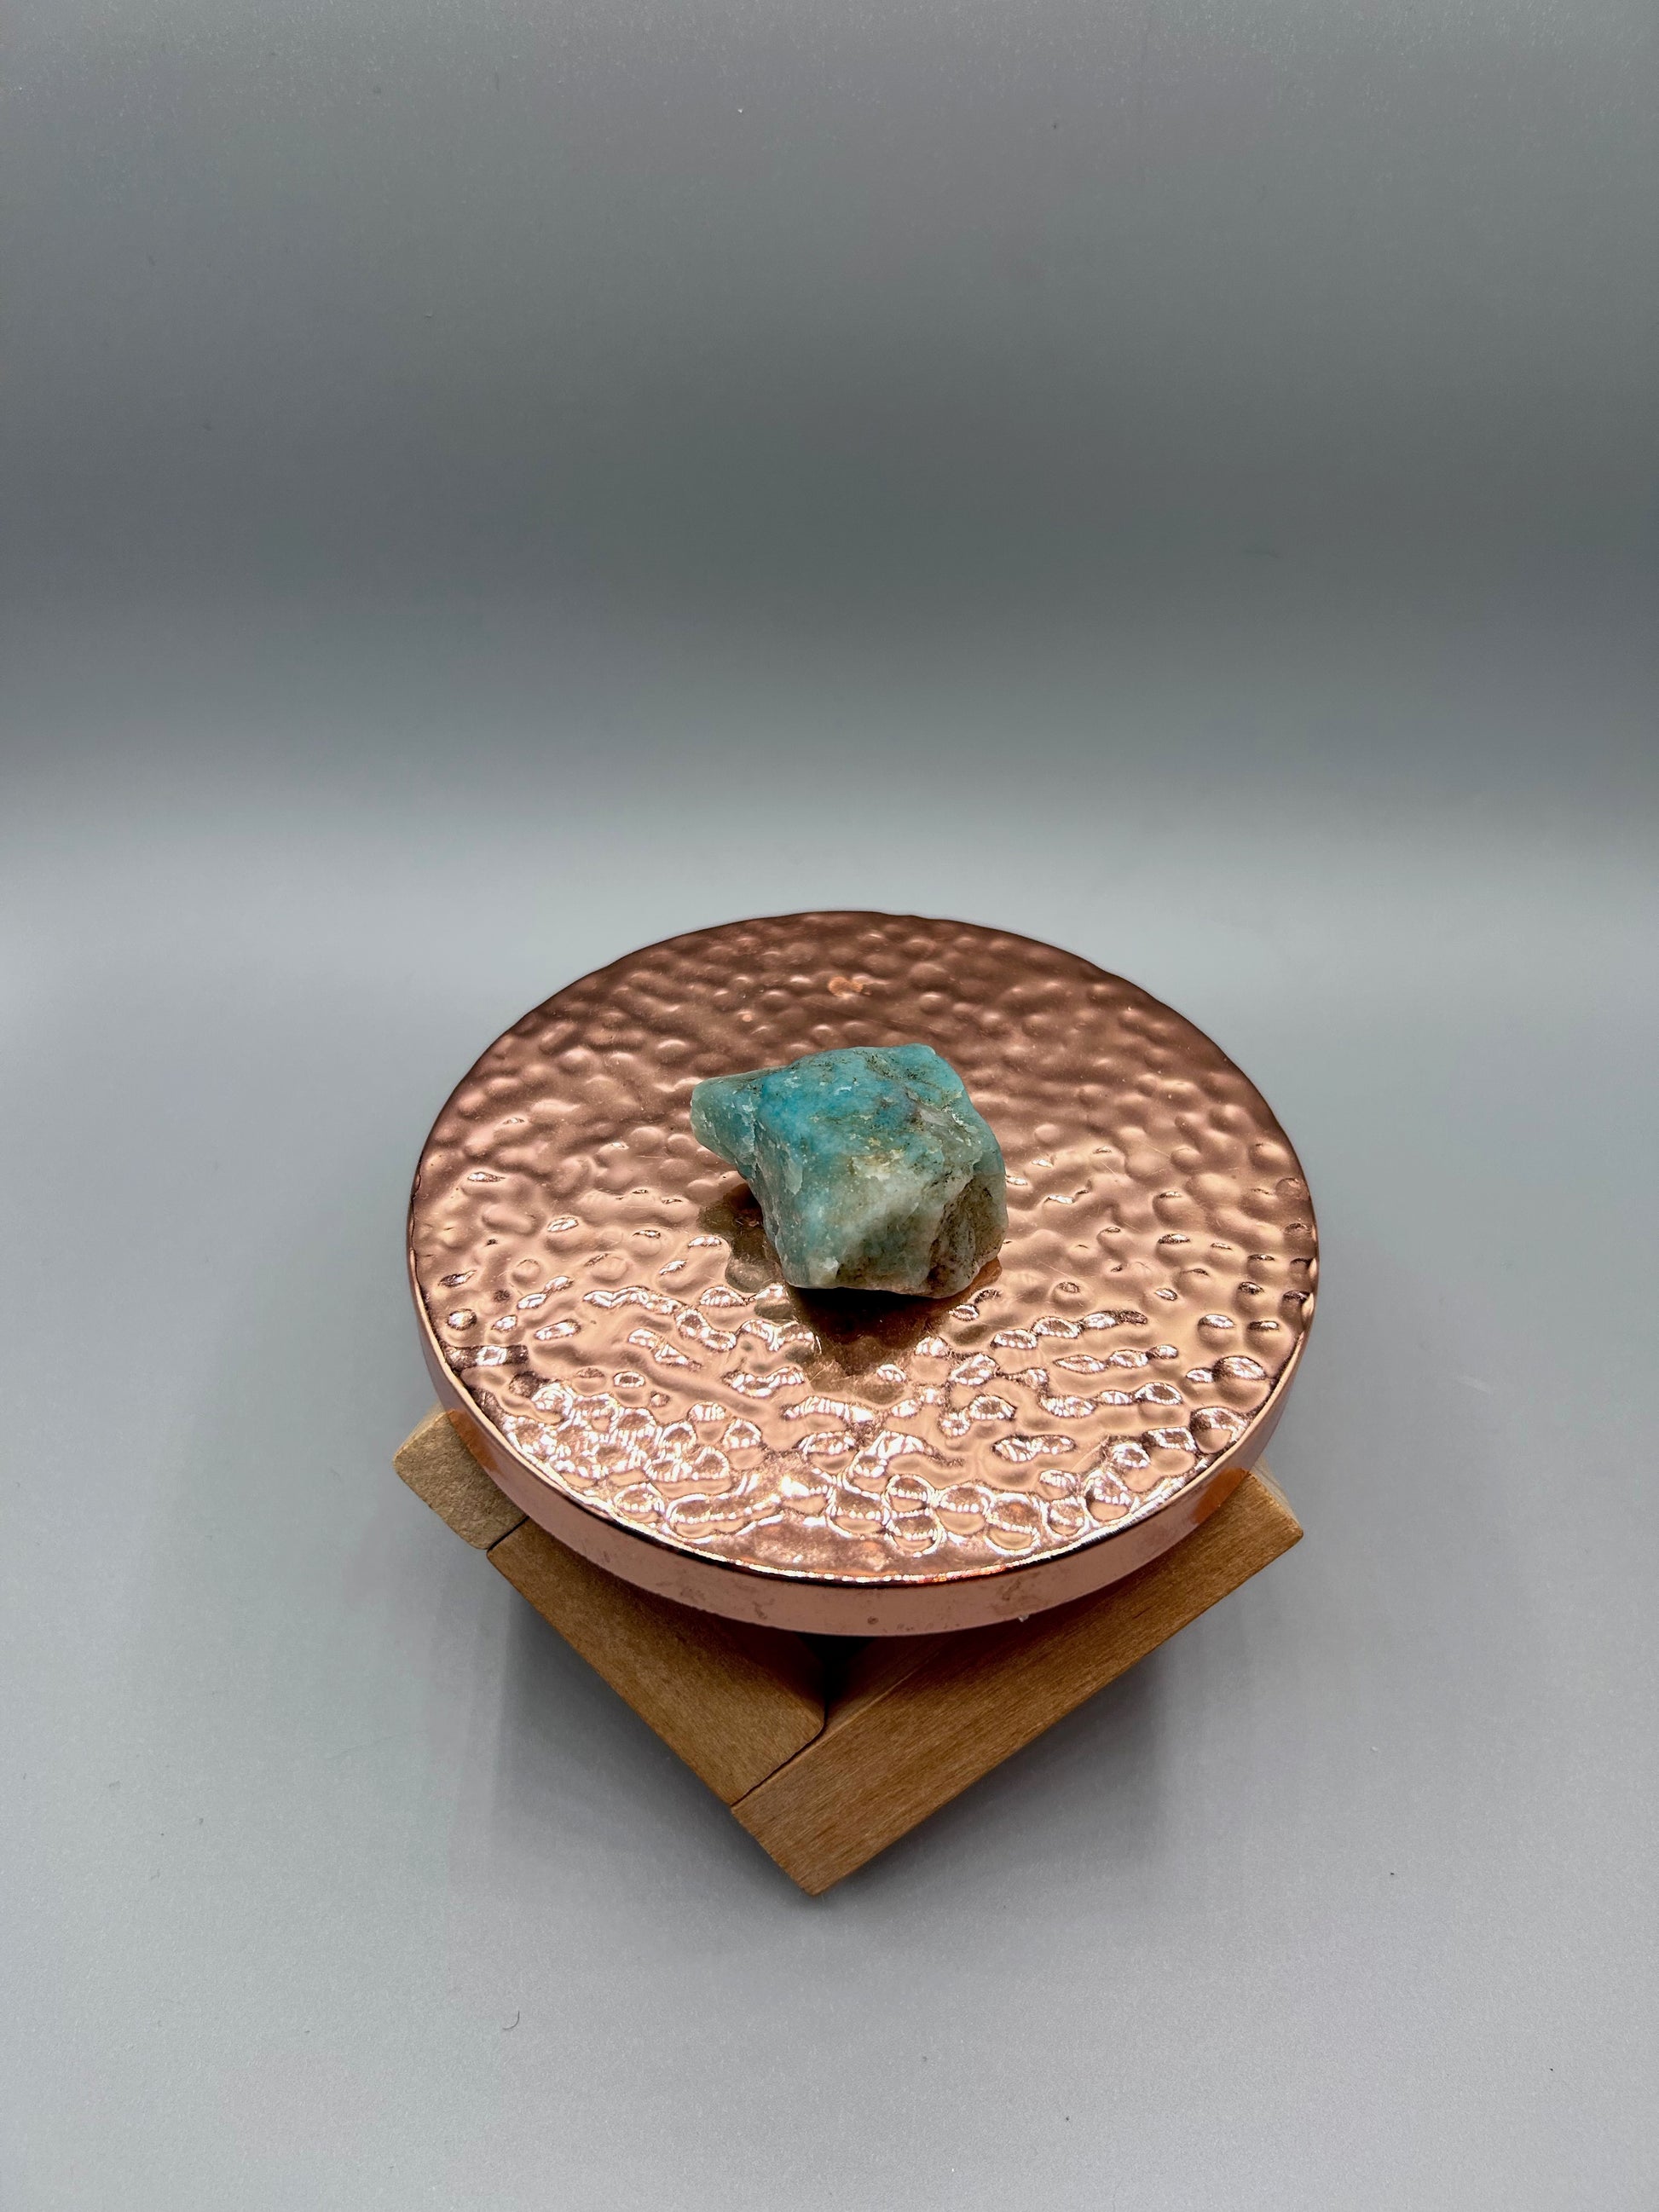 amazonite stone posed inside on copper plate. 